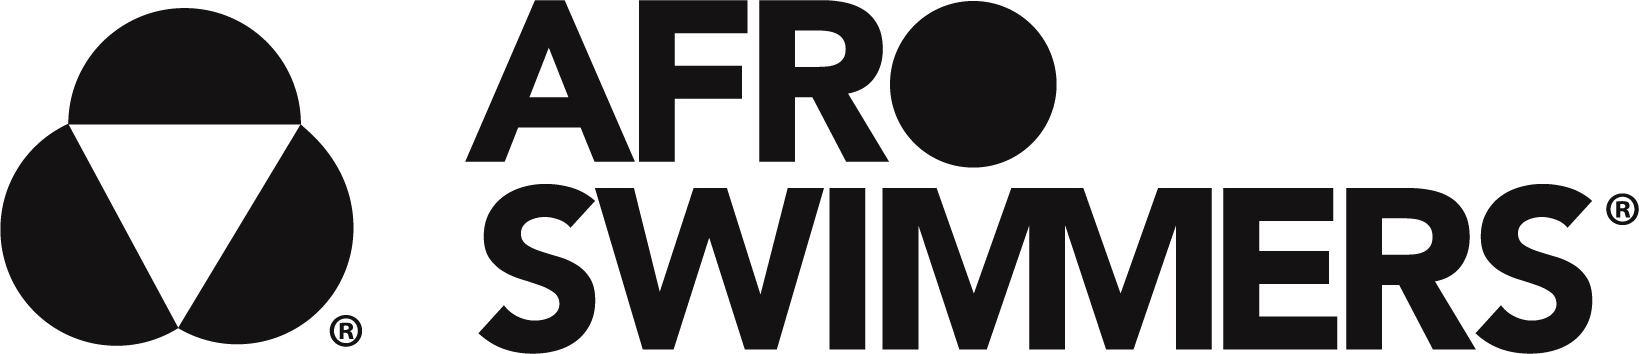 Afroswimmers_Logo.png